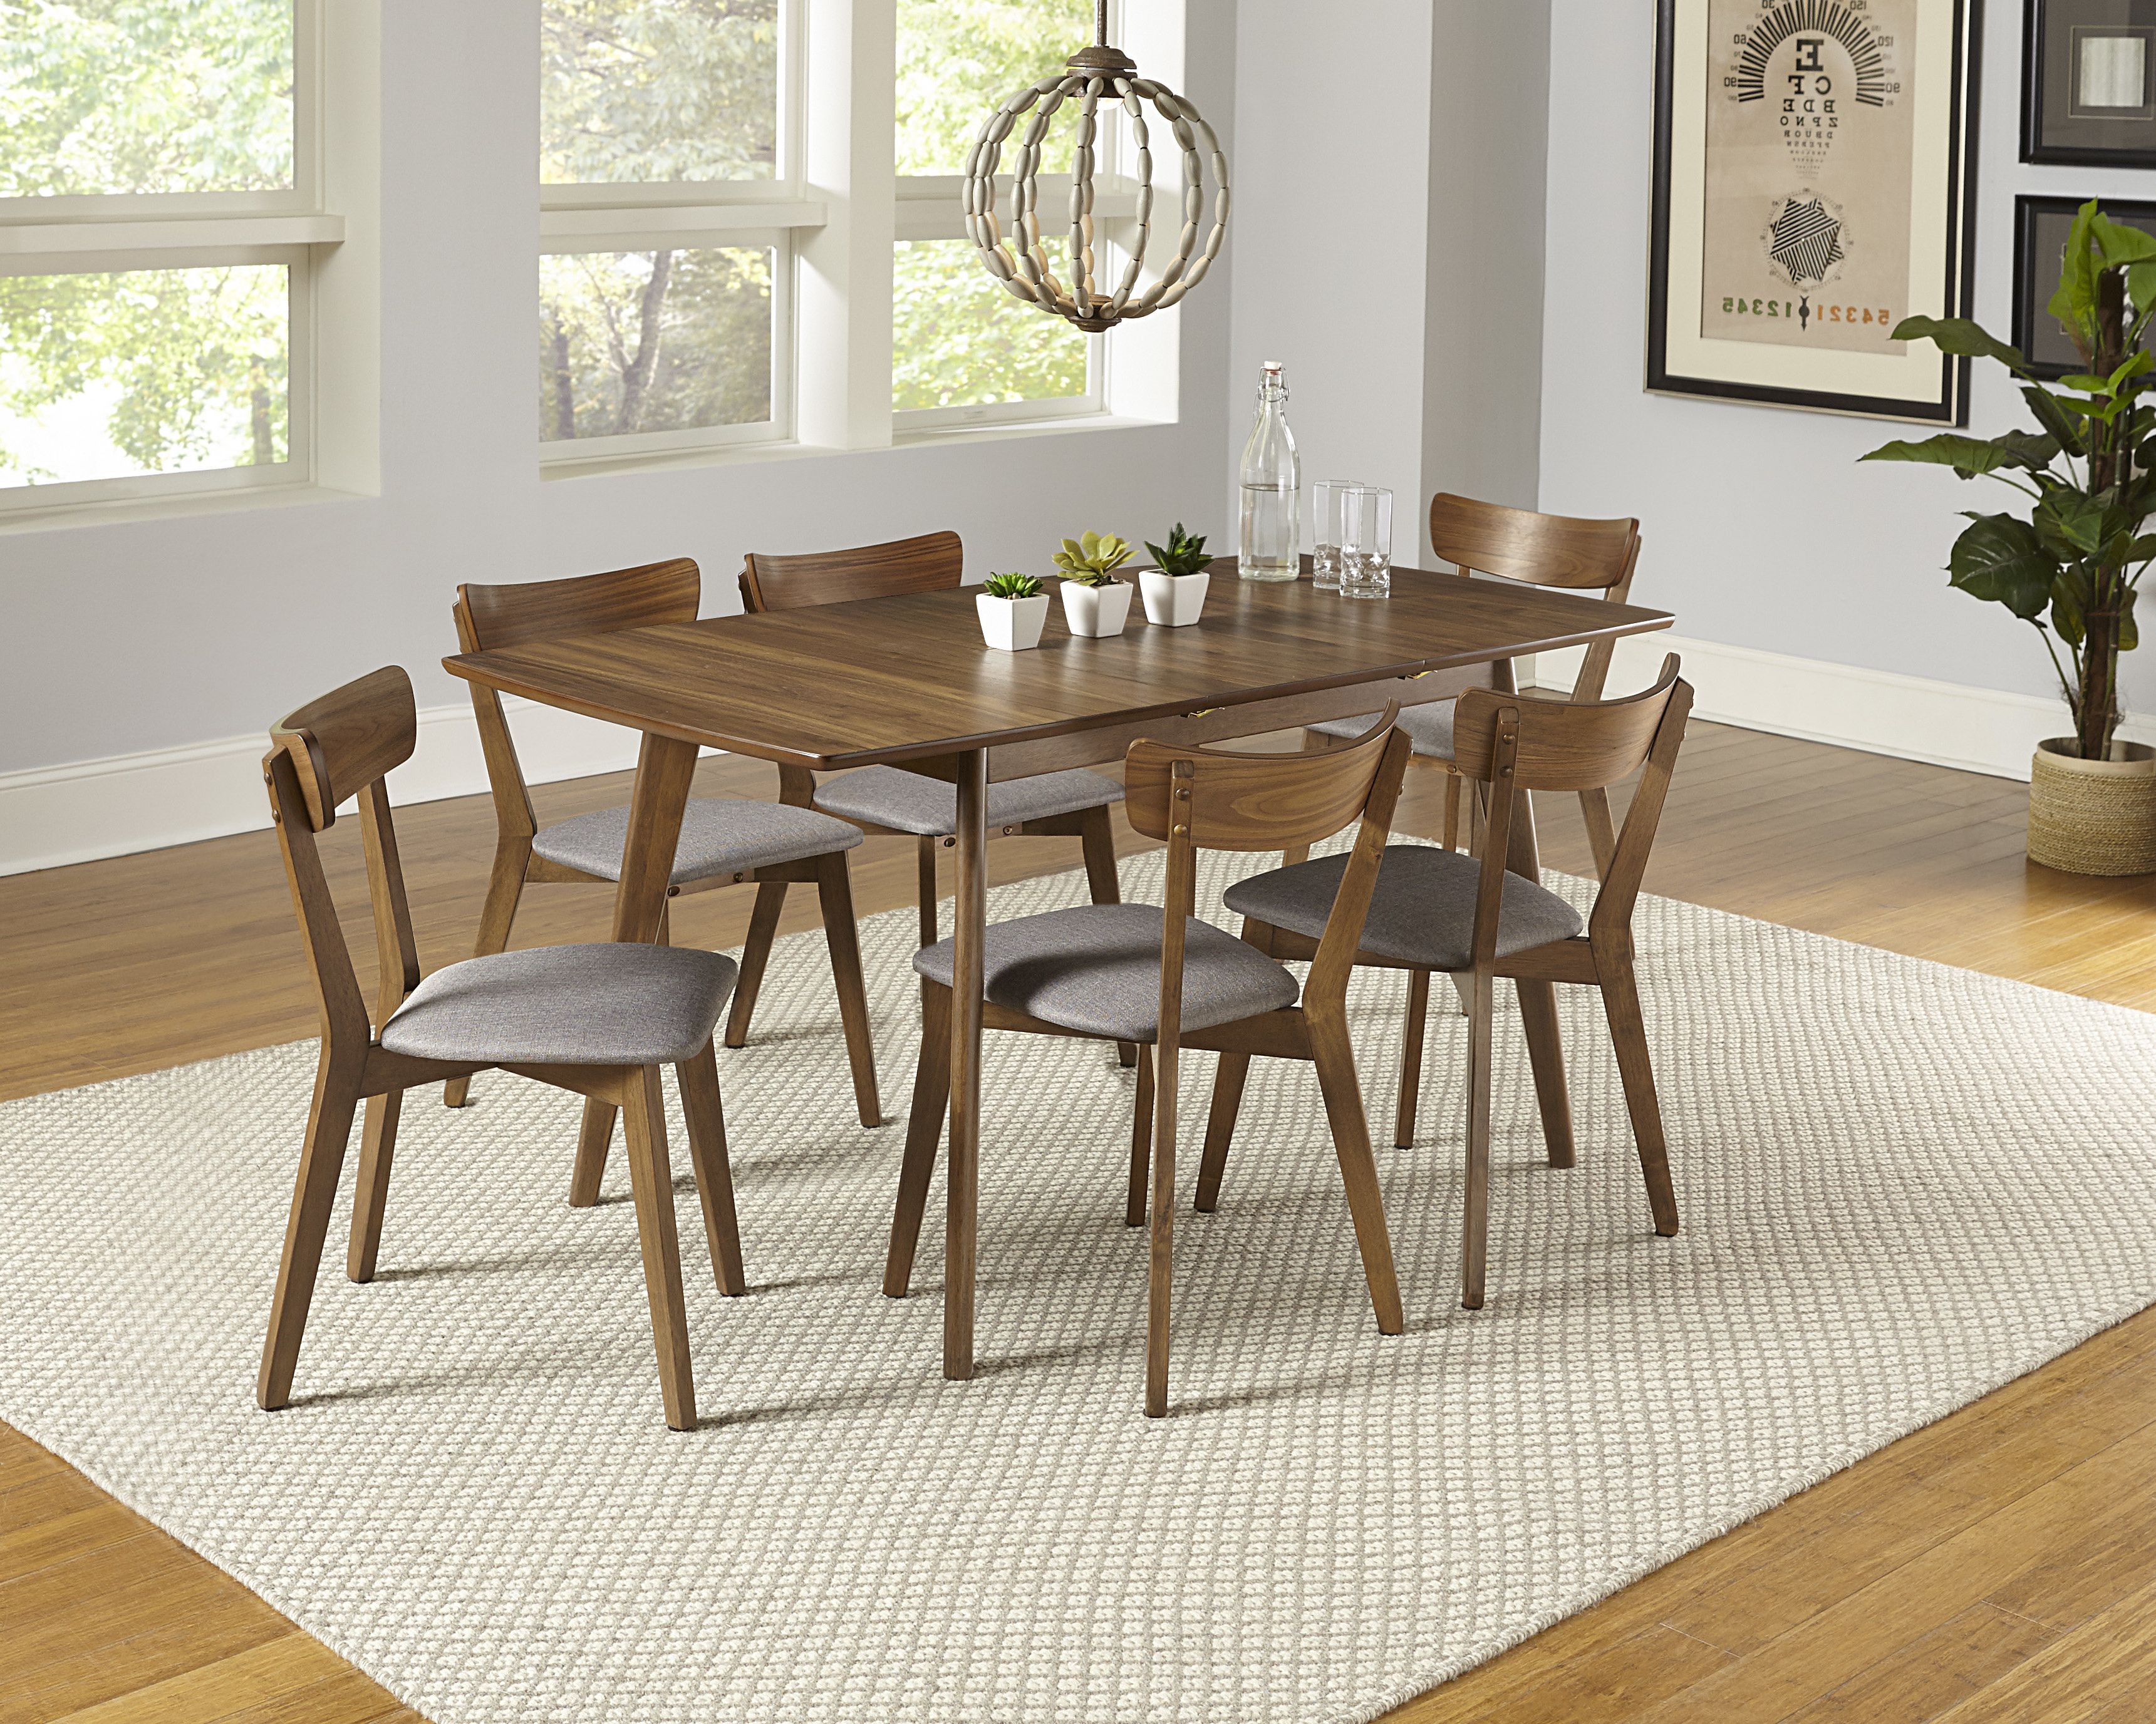 Rockaway 7 Piece Extendable Solid Wood Dining Set & Reviews (View 5 of 25)